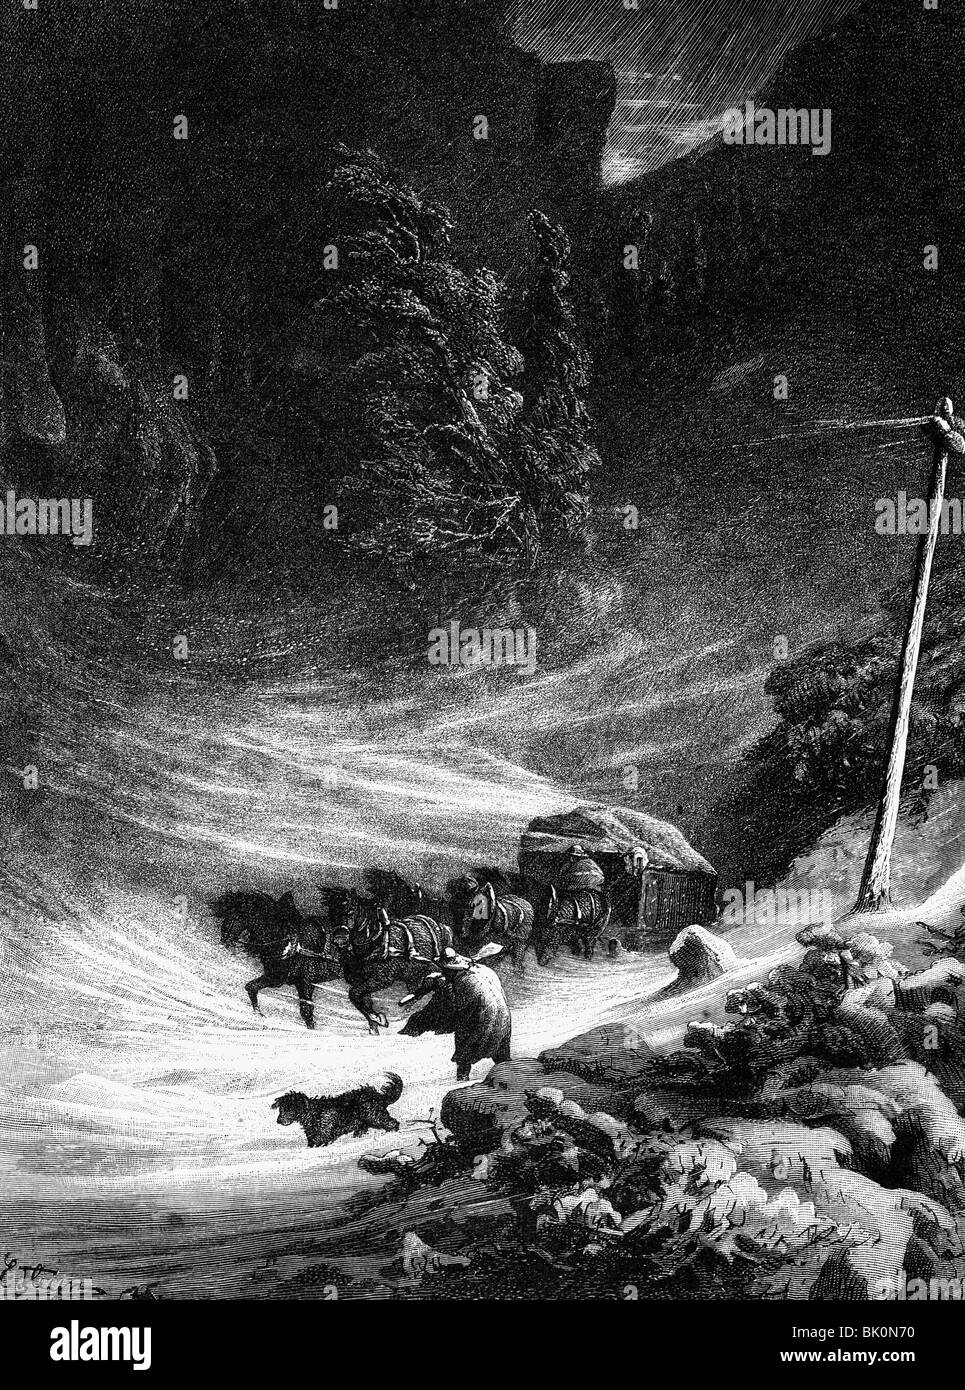 transport / transportation, coaches, snowstorm on the mountain road, wood engraving after Ernst Heyn, 19th century, snow, storm, winter, weather, mountains, coach, carriage, street, historic, historical, people, Stock Photo